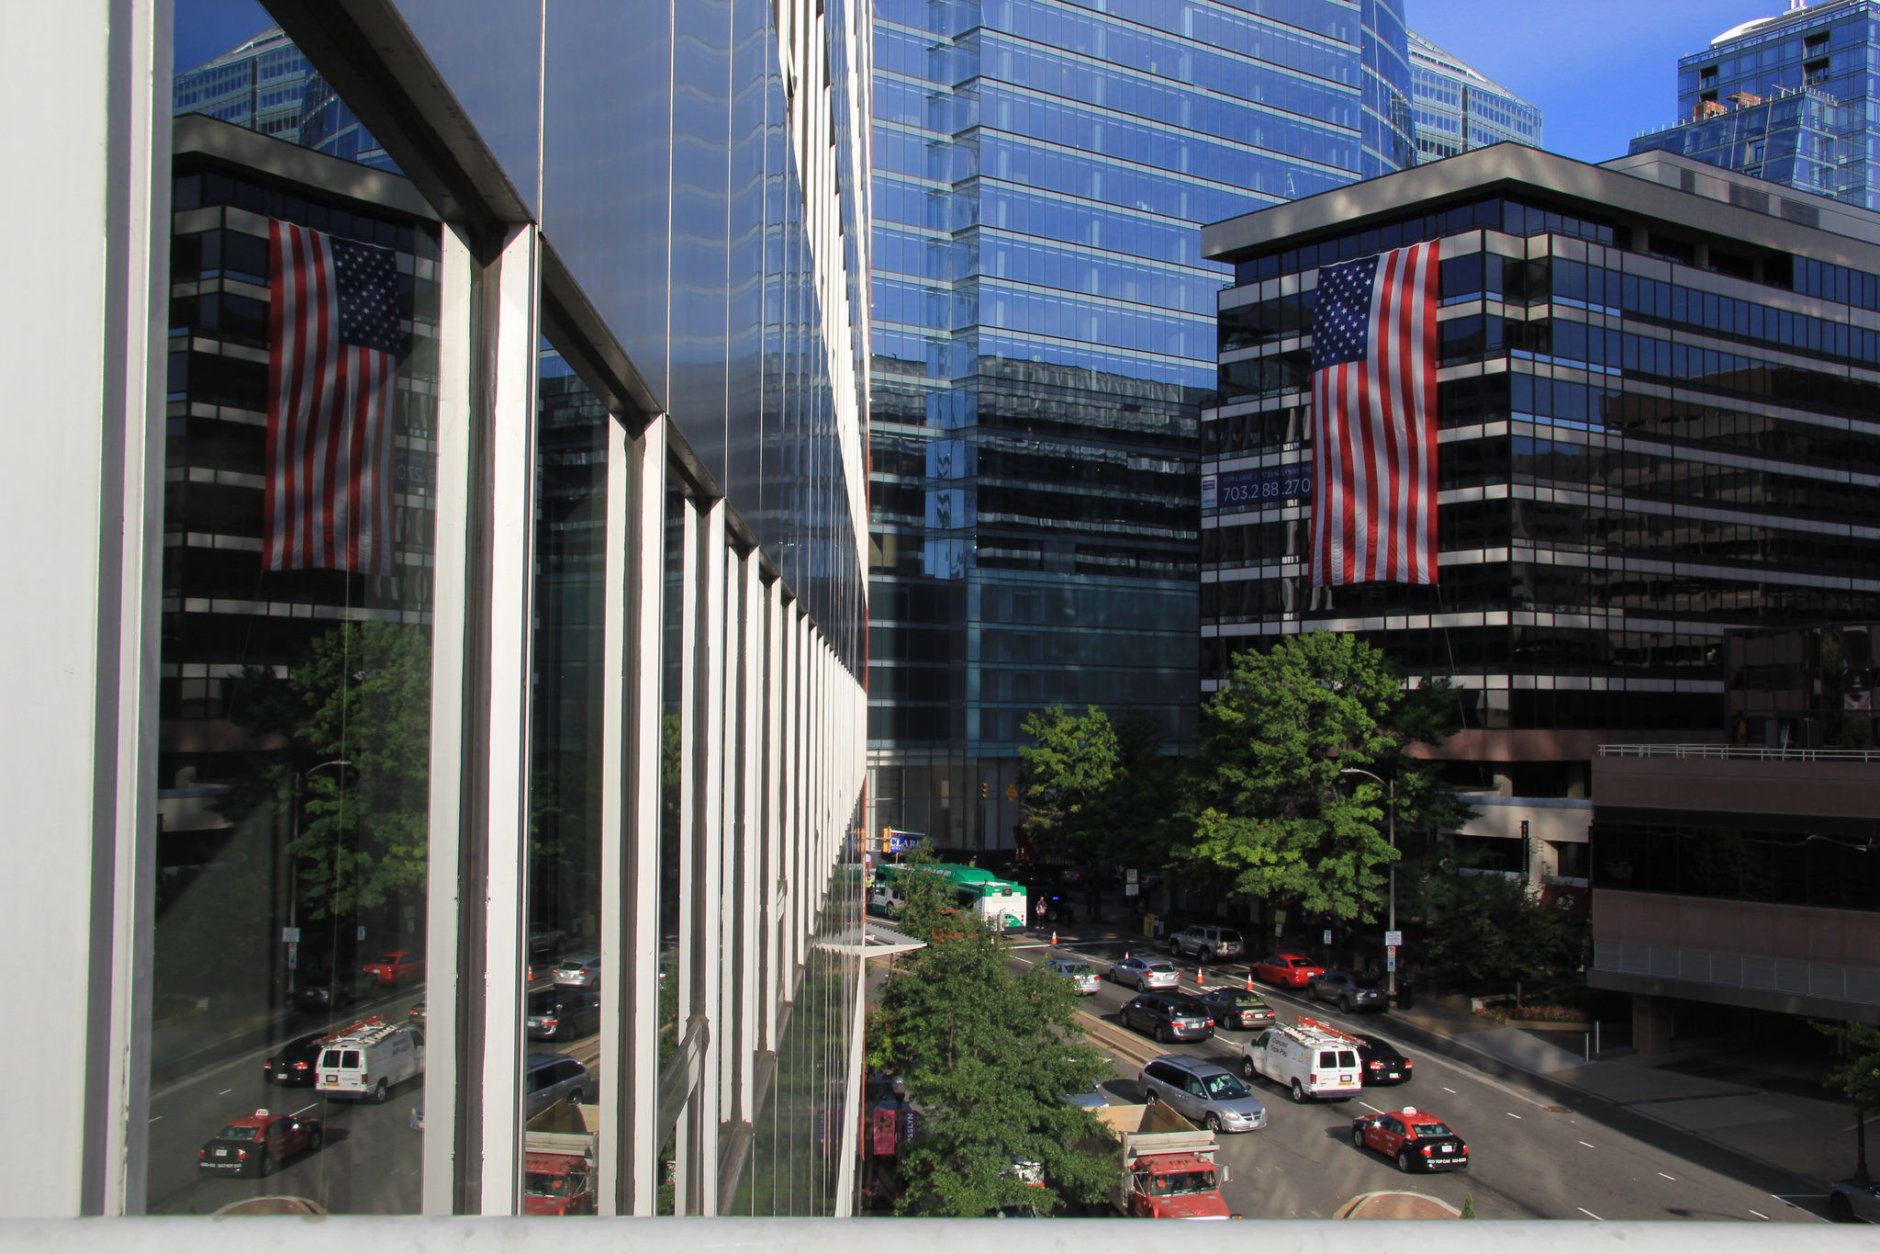 American flags hang from the tops of buildings in a show of patriotism and remembrance. (Courtesy Rosslyn Business Improvement District)